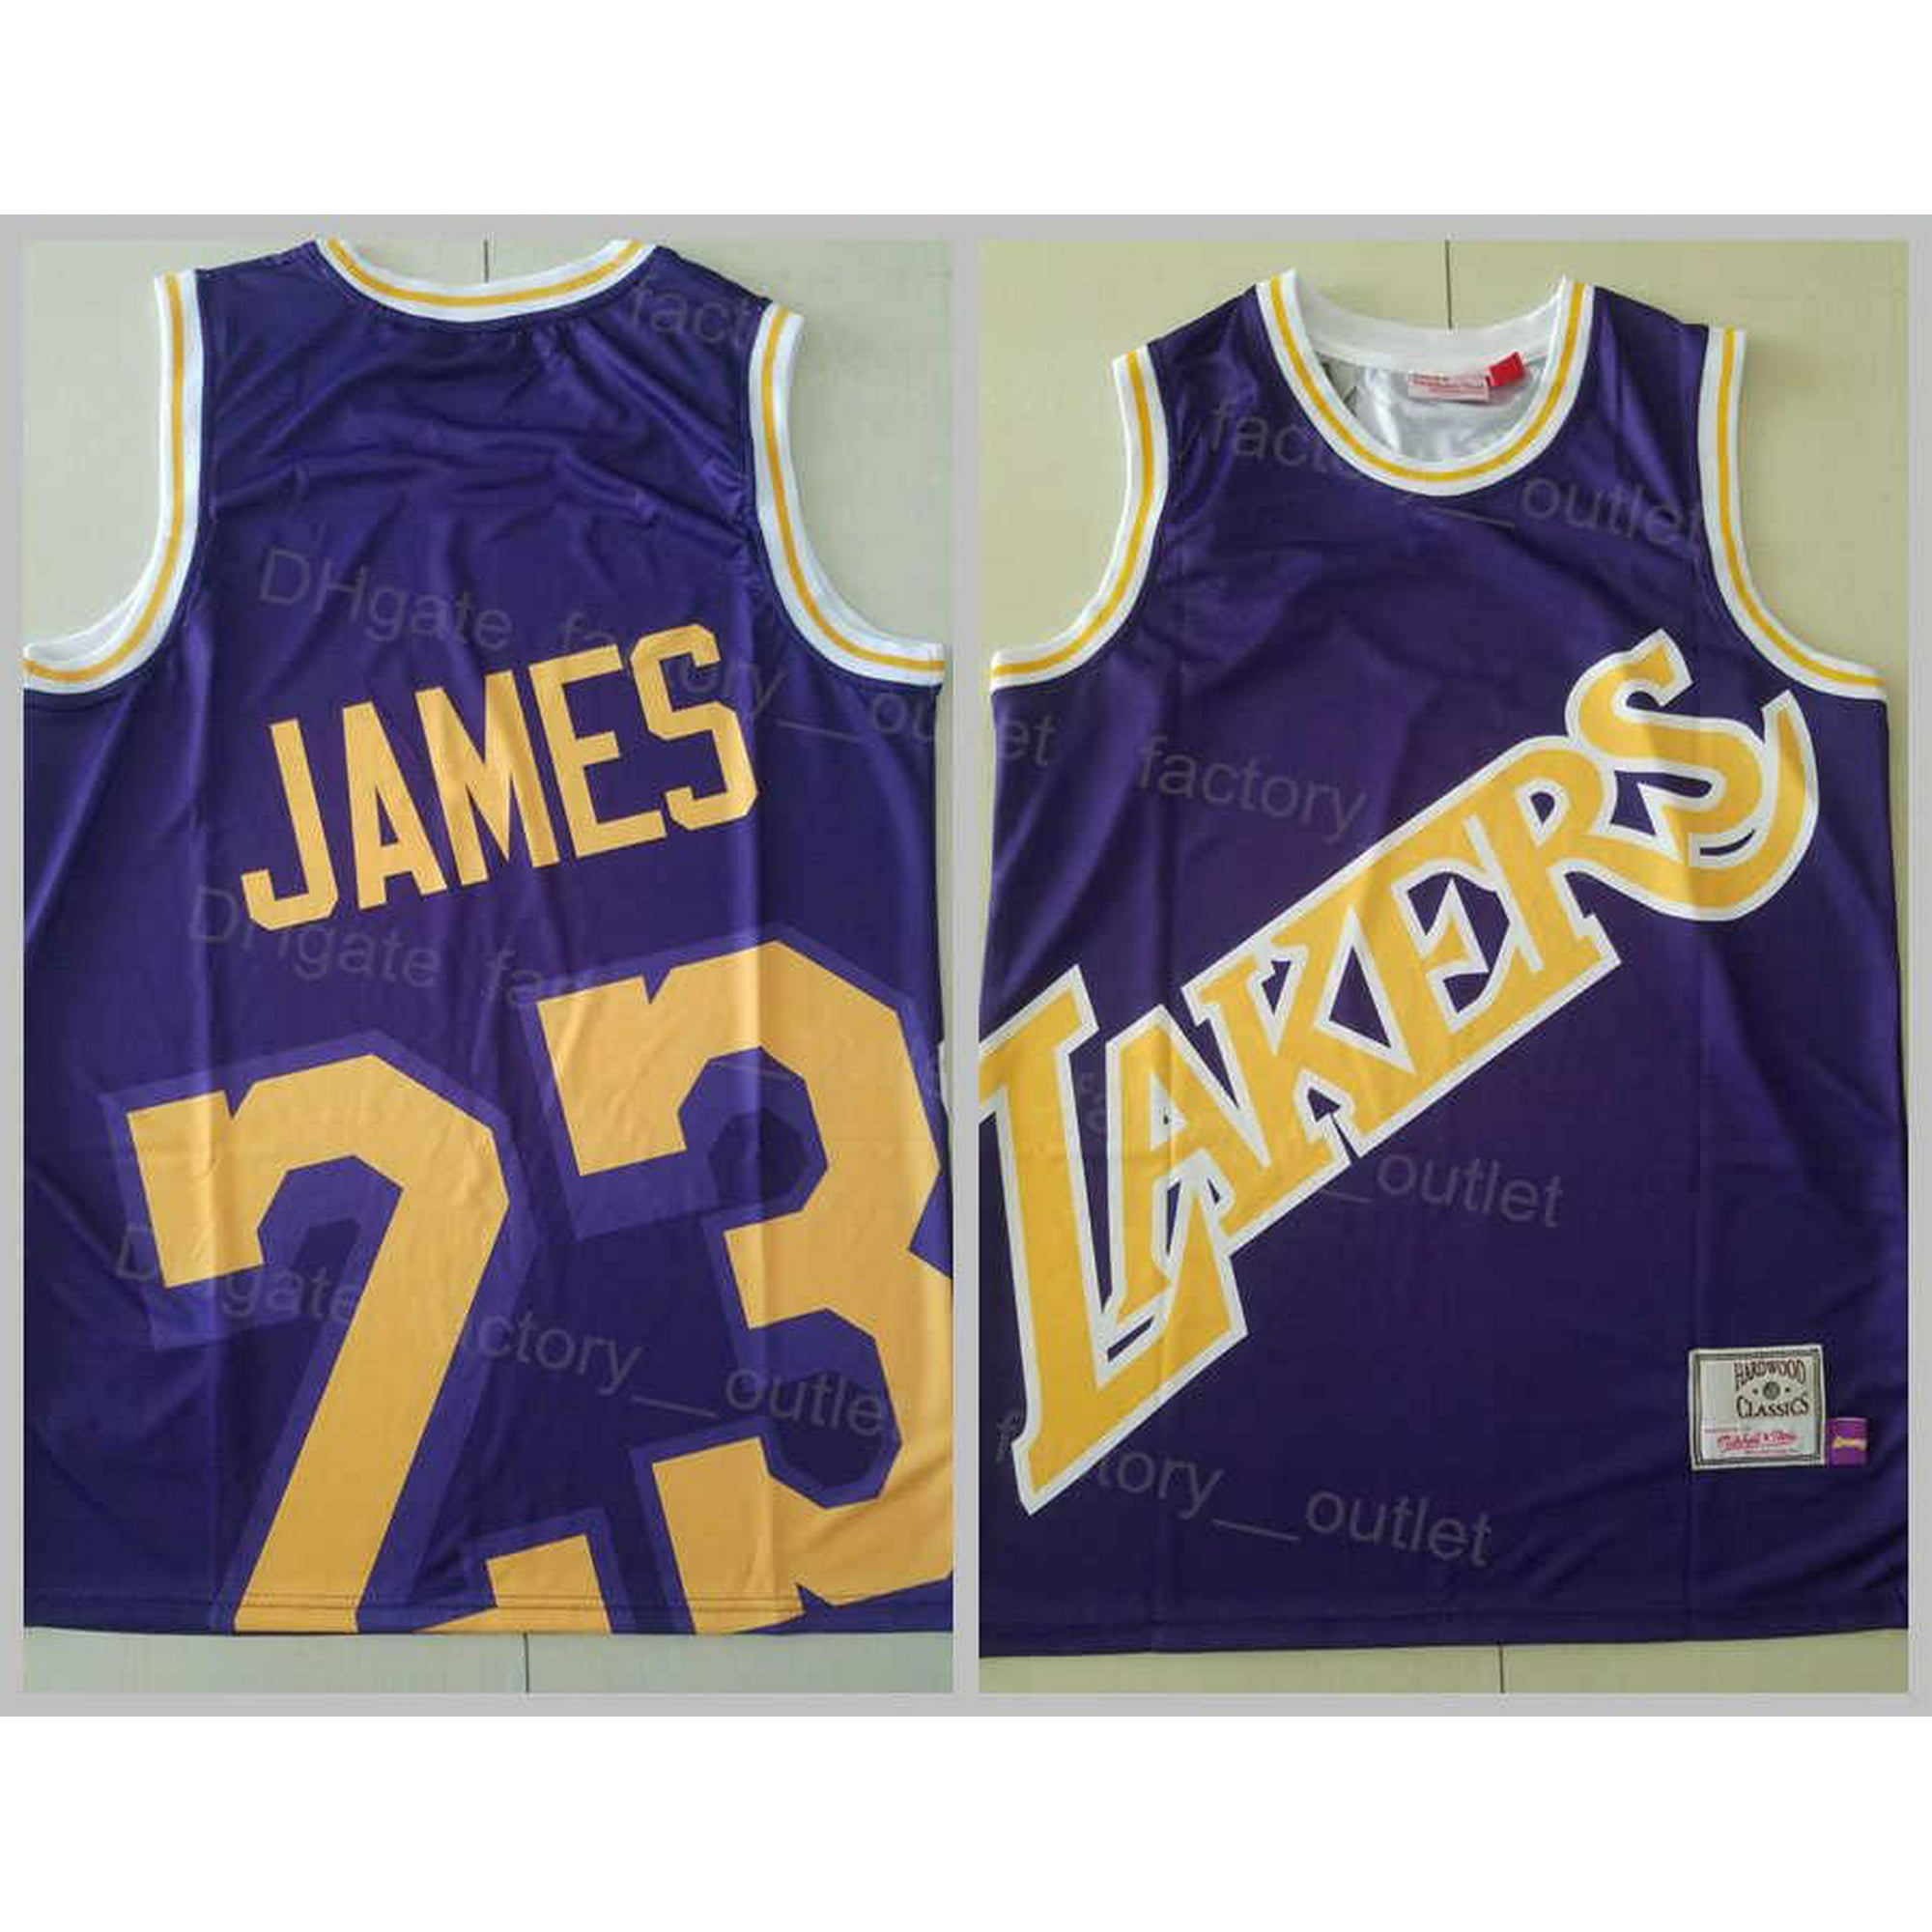 NBA_ Mitchell and Ness Basketball Retro LeBron James Jersey Bryant Michael  23 Vintage Team Color Black Red Purple Yellow Bre''nba''jerseys